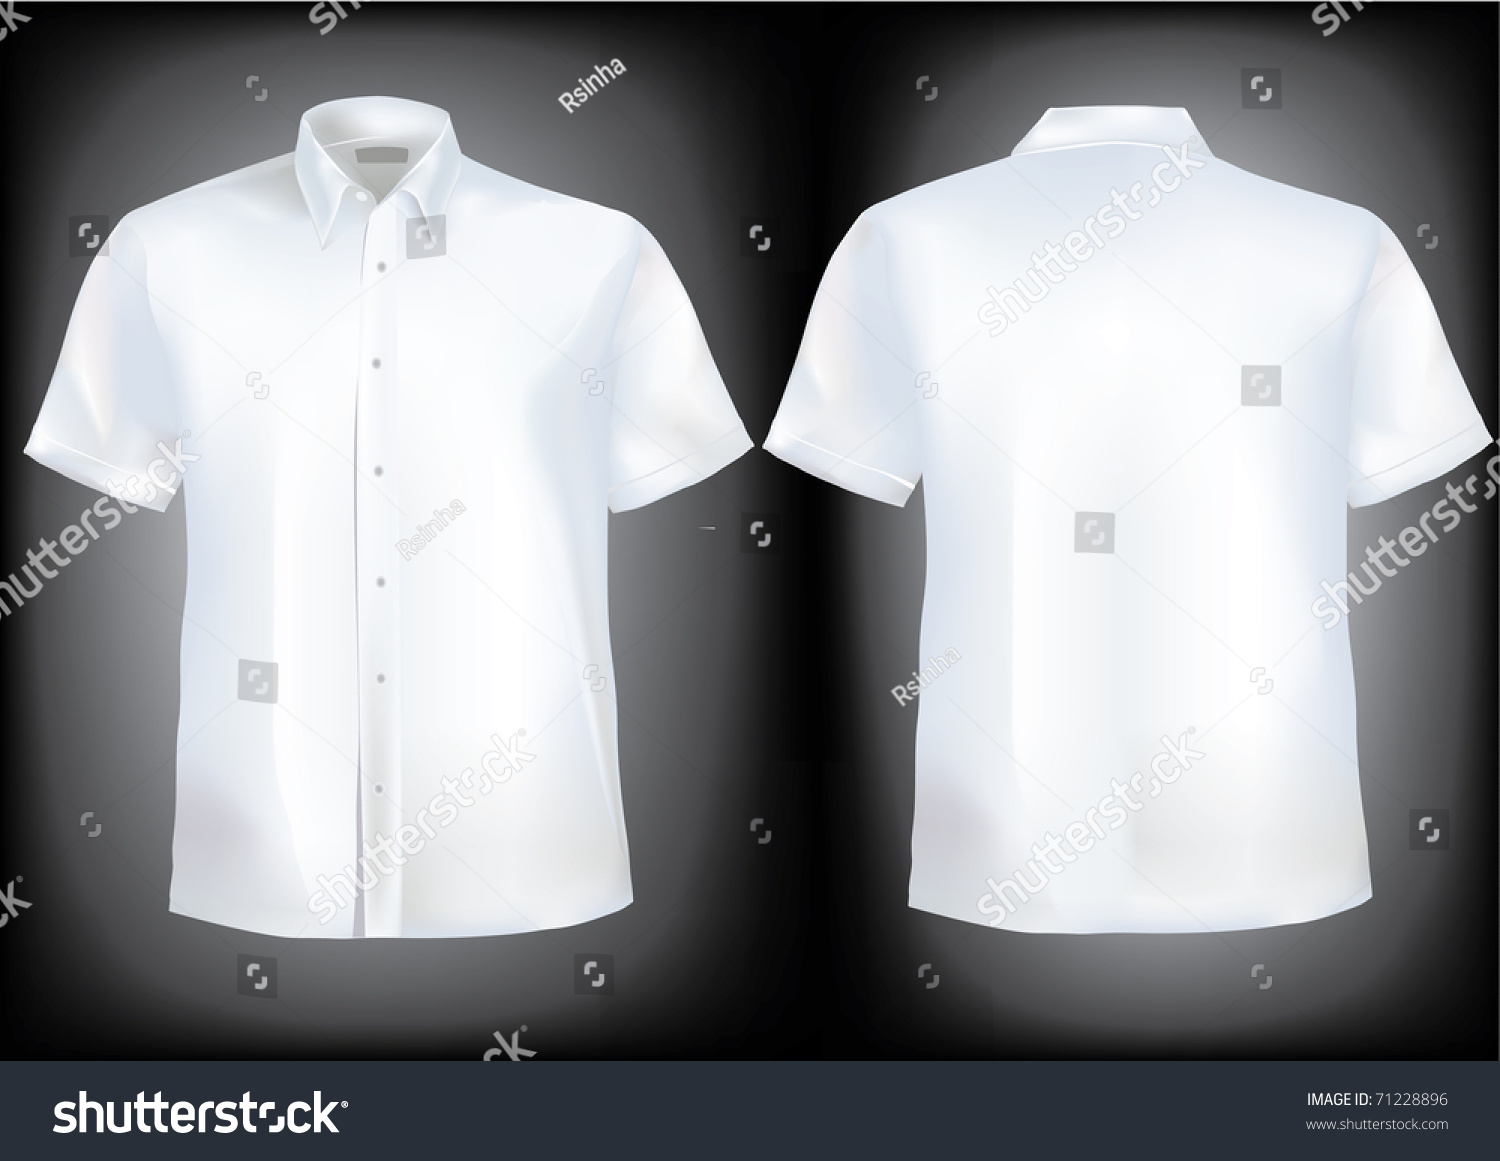 Shirt Front And Back With Collar And Half Sleeves In Mesh.Shirts In ...